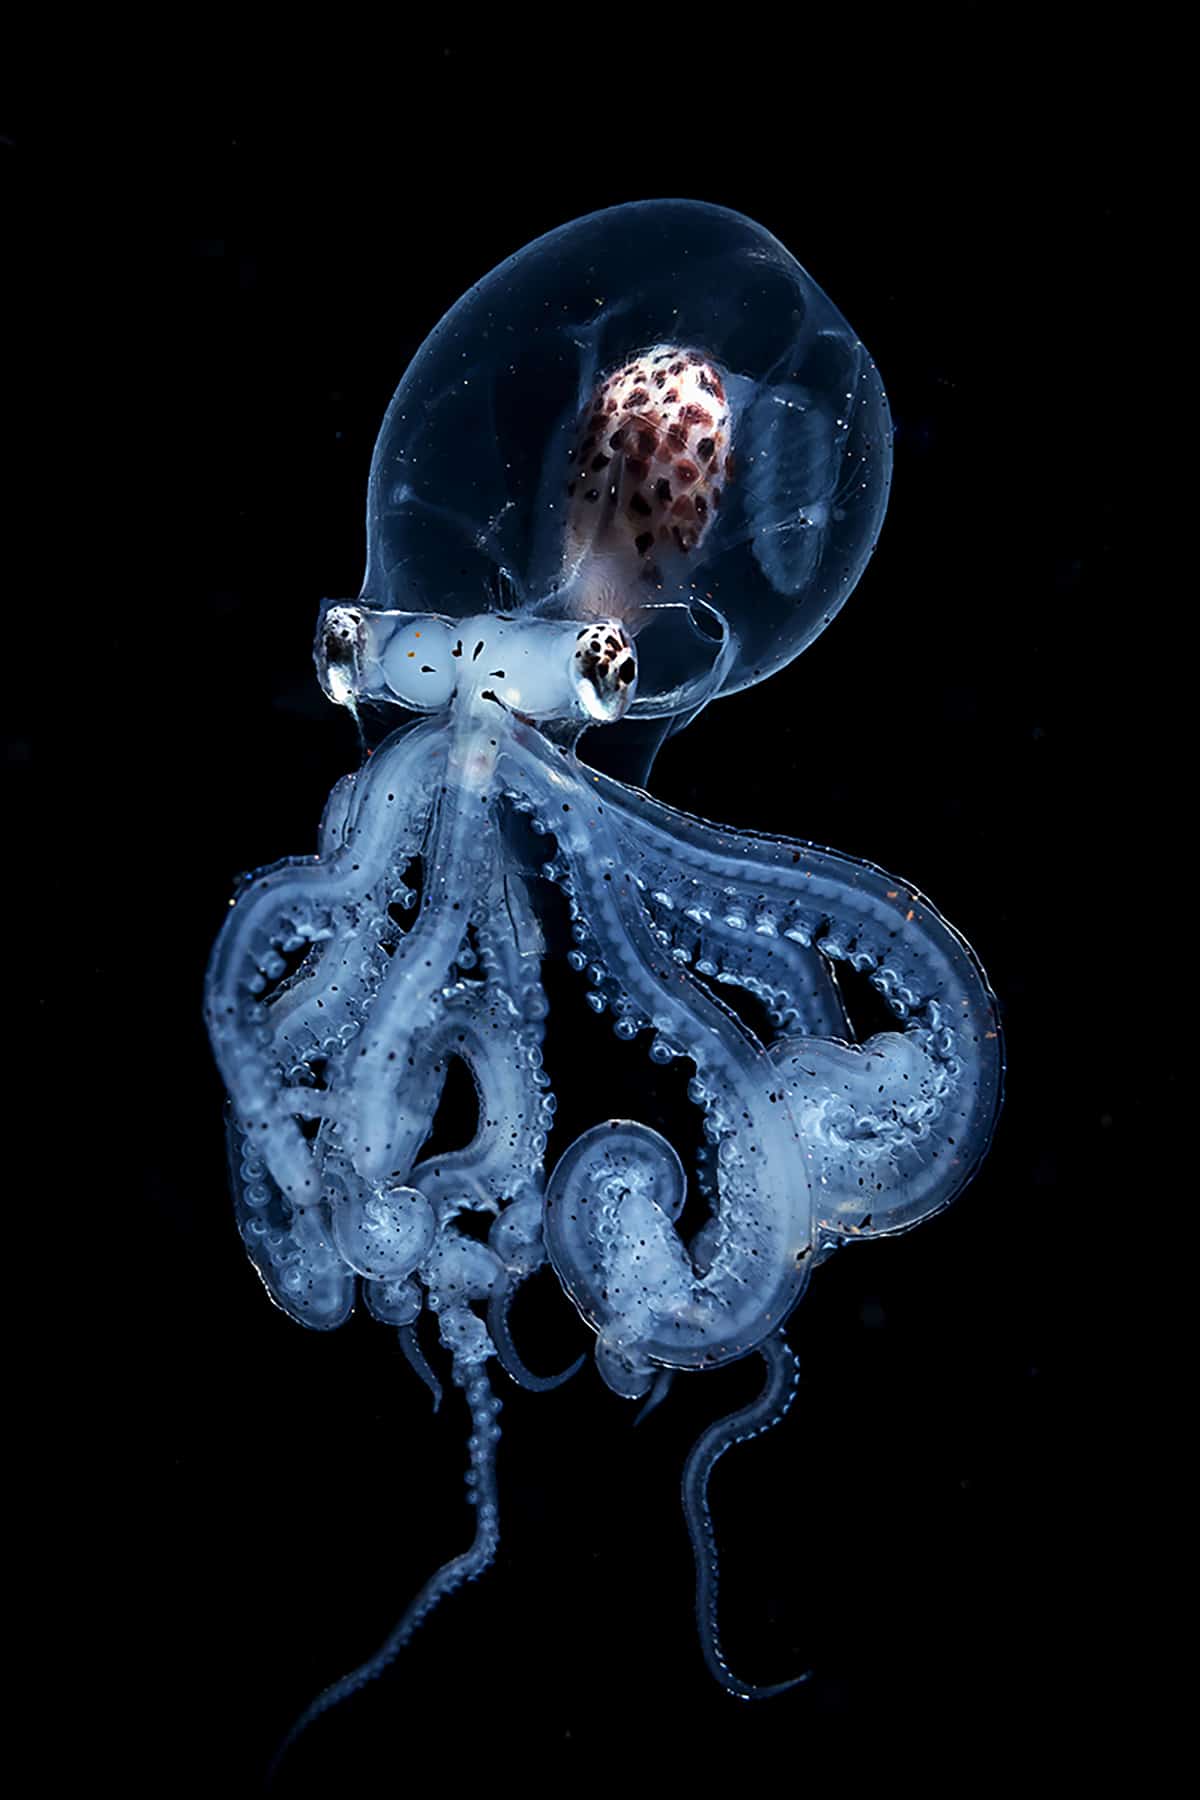 Transparent Octopus Caught by Blackwater Photographer [Interview]